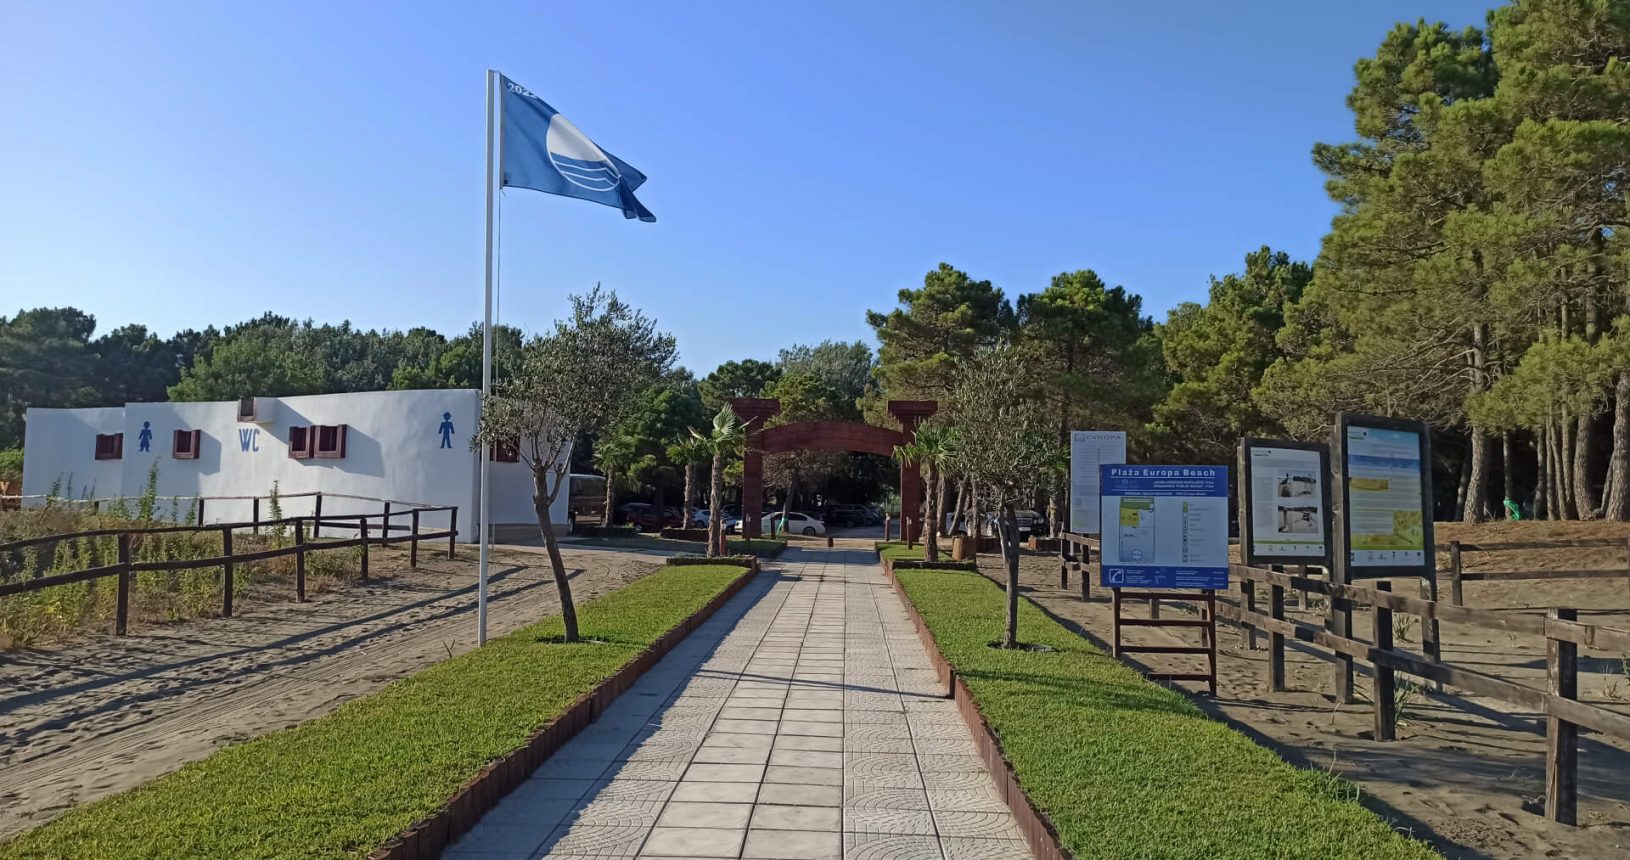 Toilets and blue flag at Europa Beach